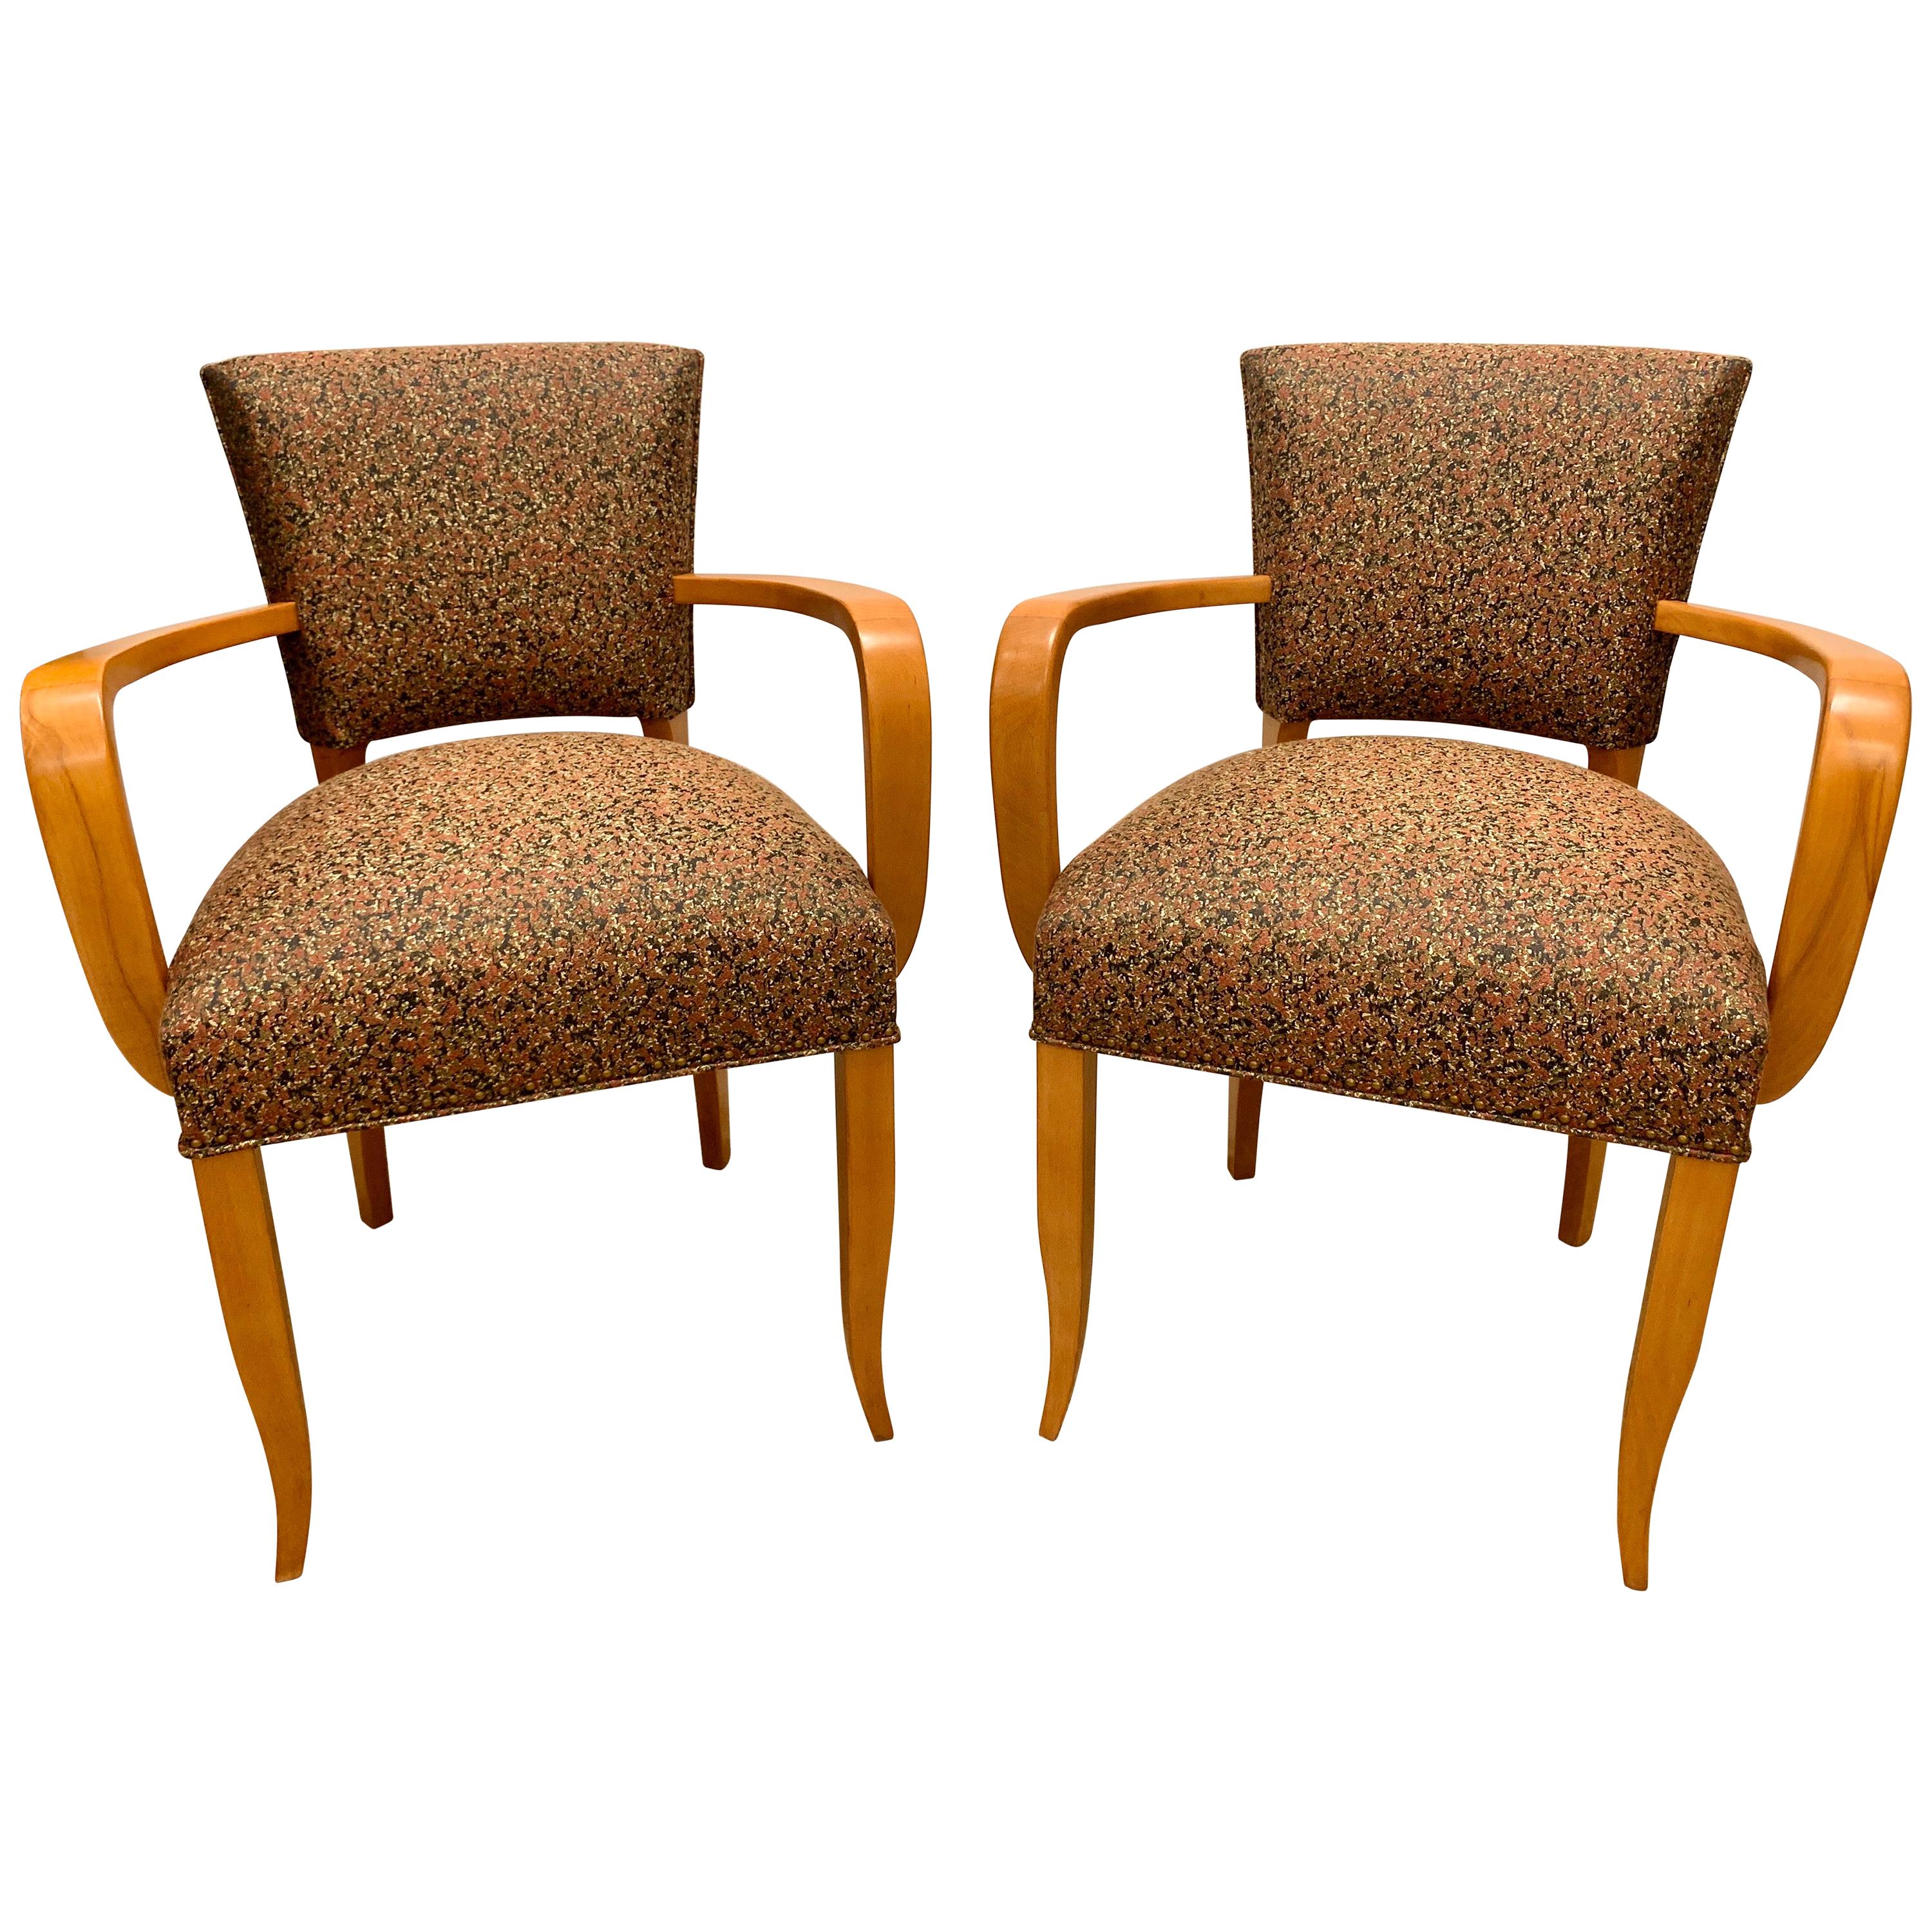 French Deco Bridge/ Side-Chairs with Arms, Pair For Sale